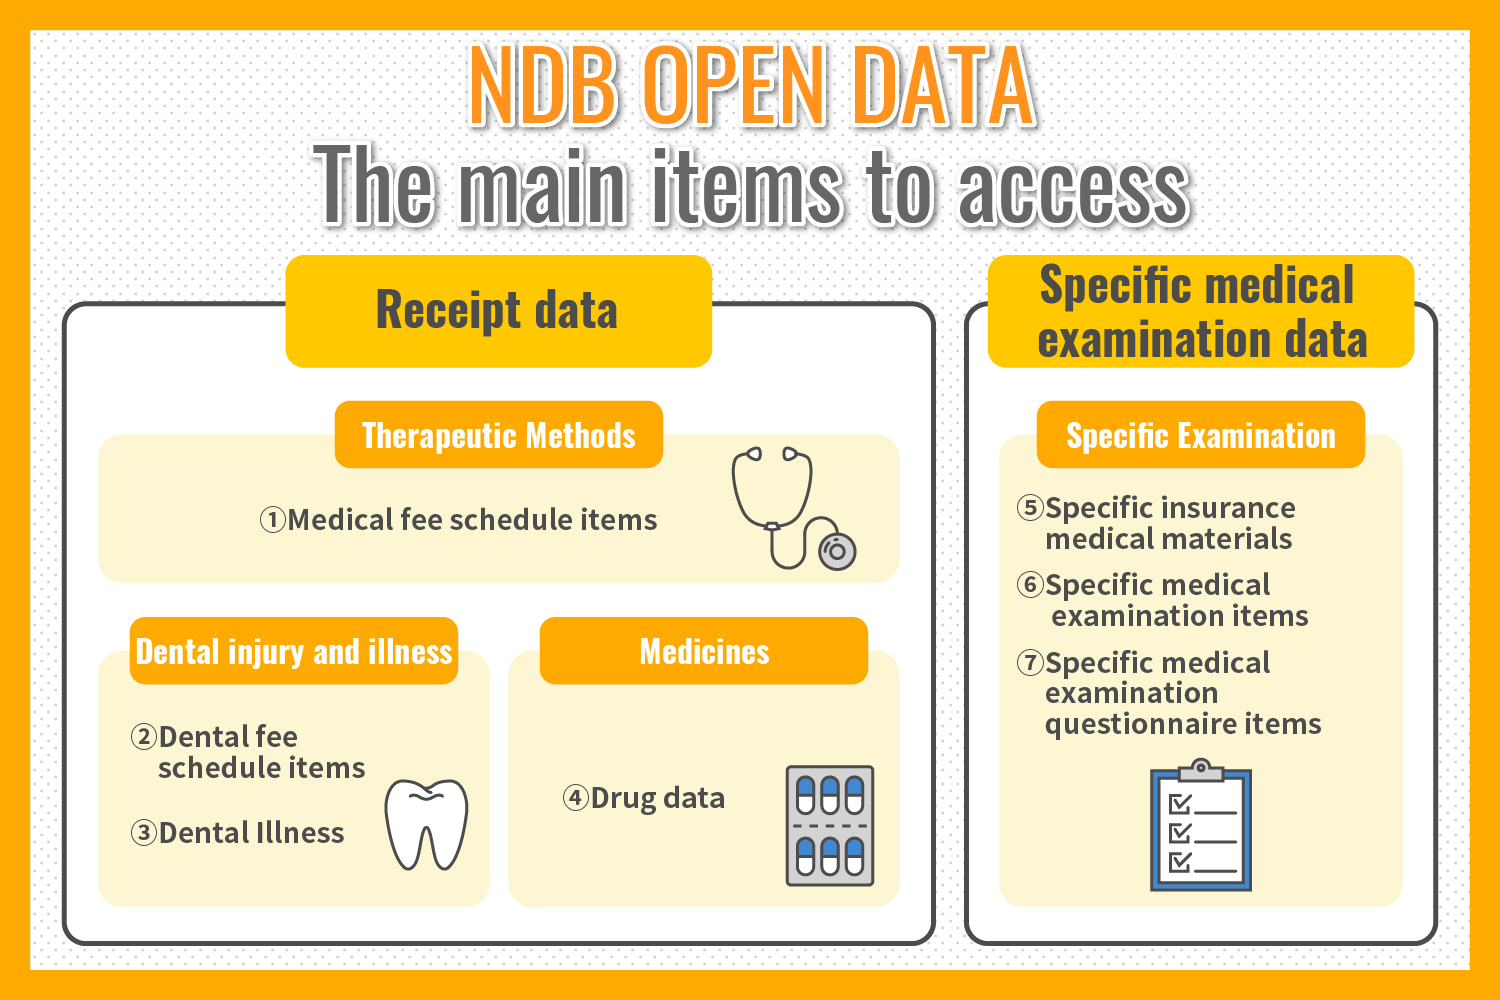 NDB OPEN DATA The main items to access